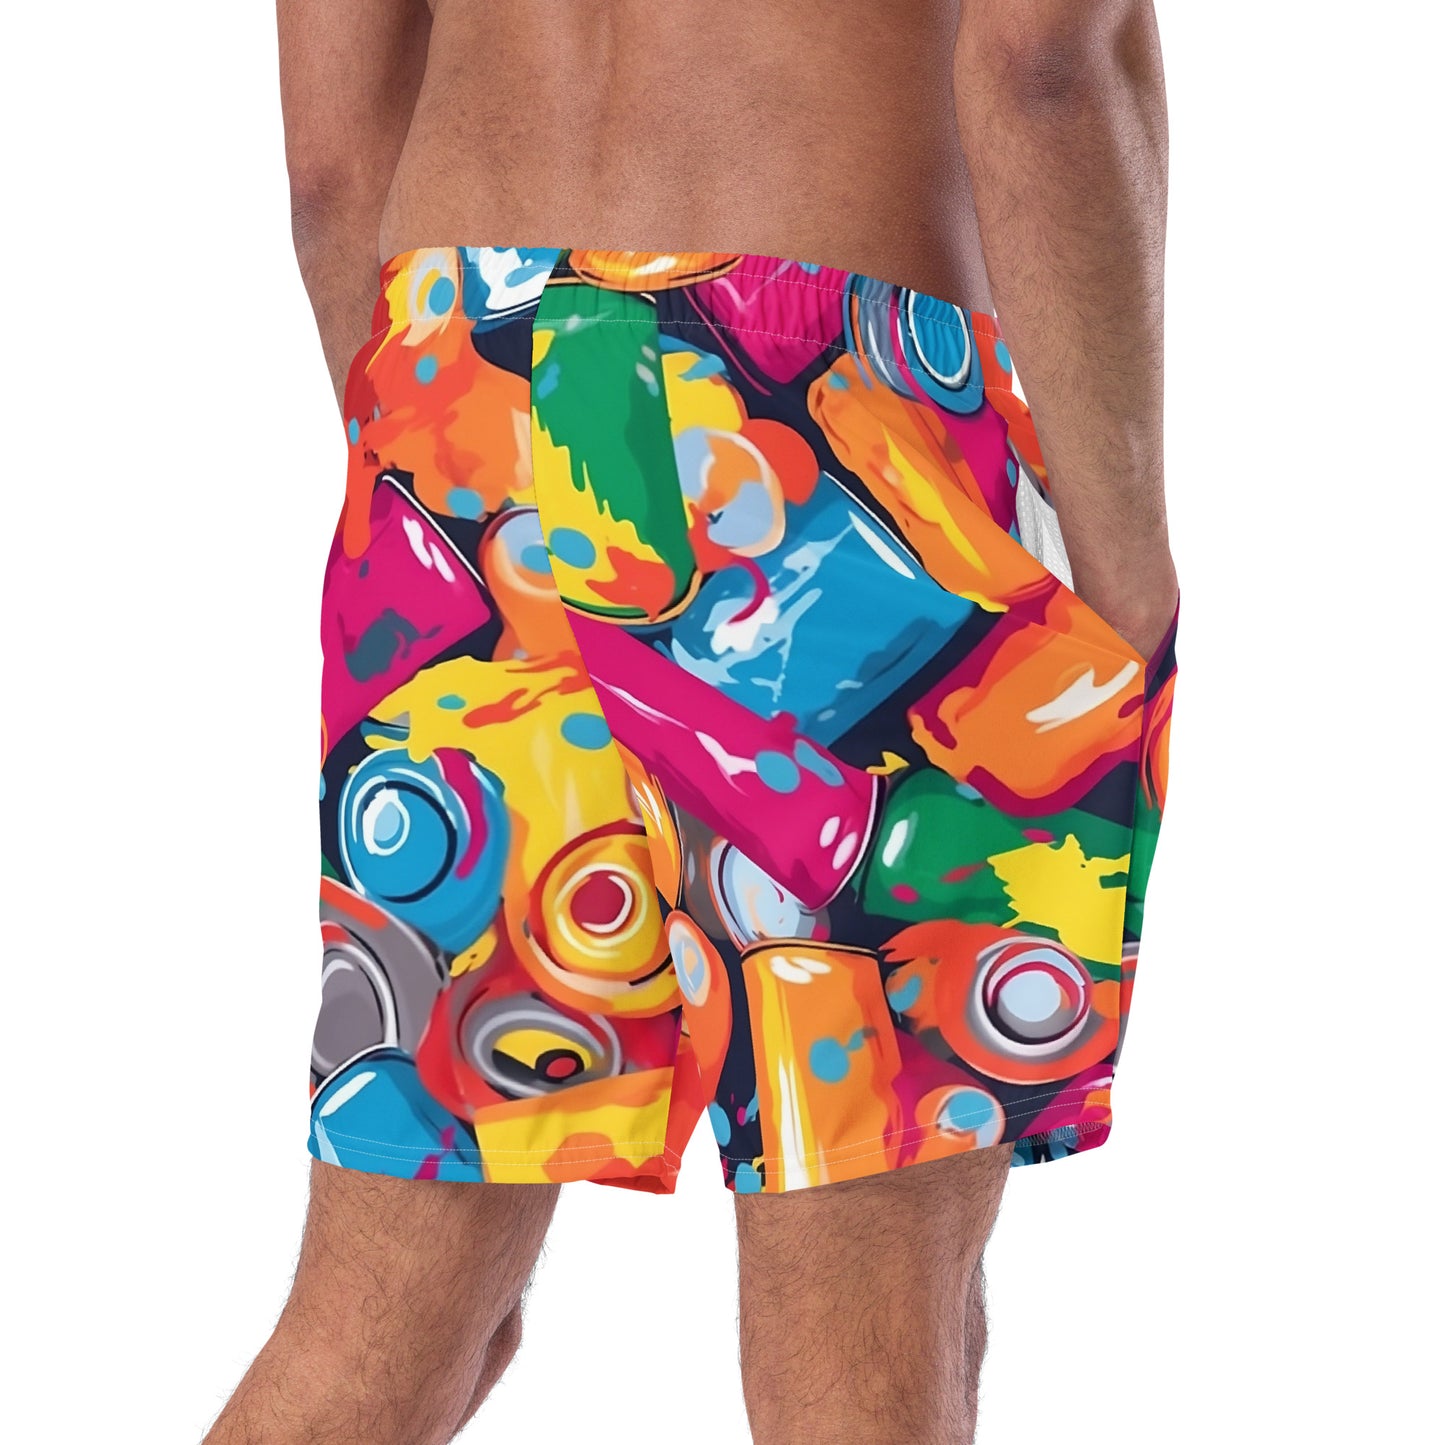 man back with spray cans swim shorts by B.Different Clothing independent streetwear inspired by street art graffiti